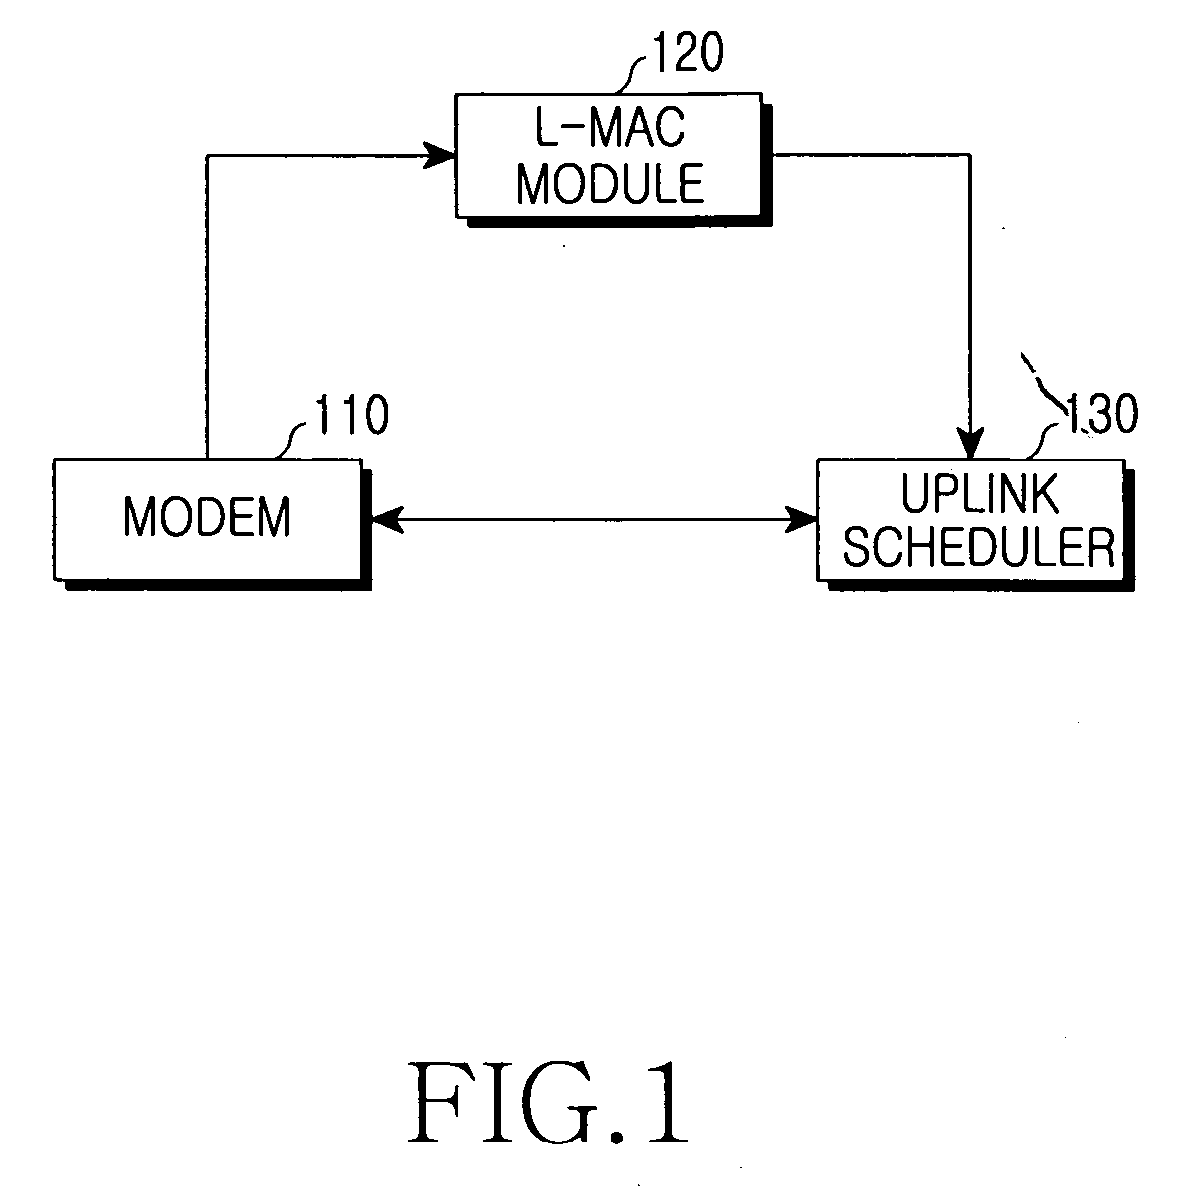 System and method for scheduling uplink in a communication system